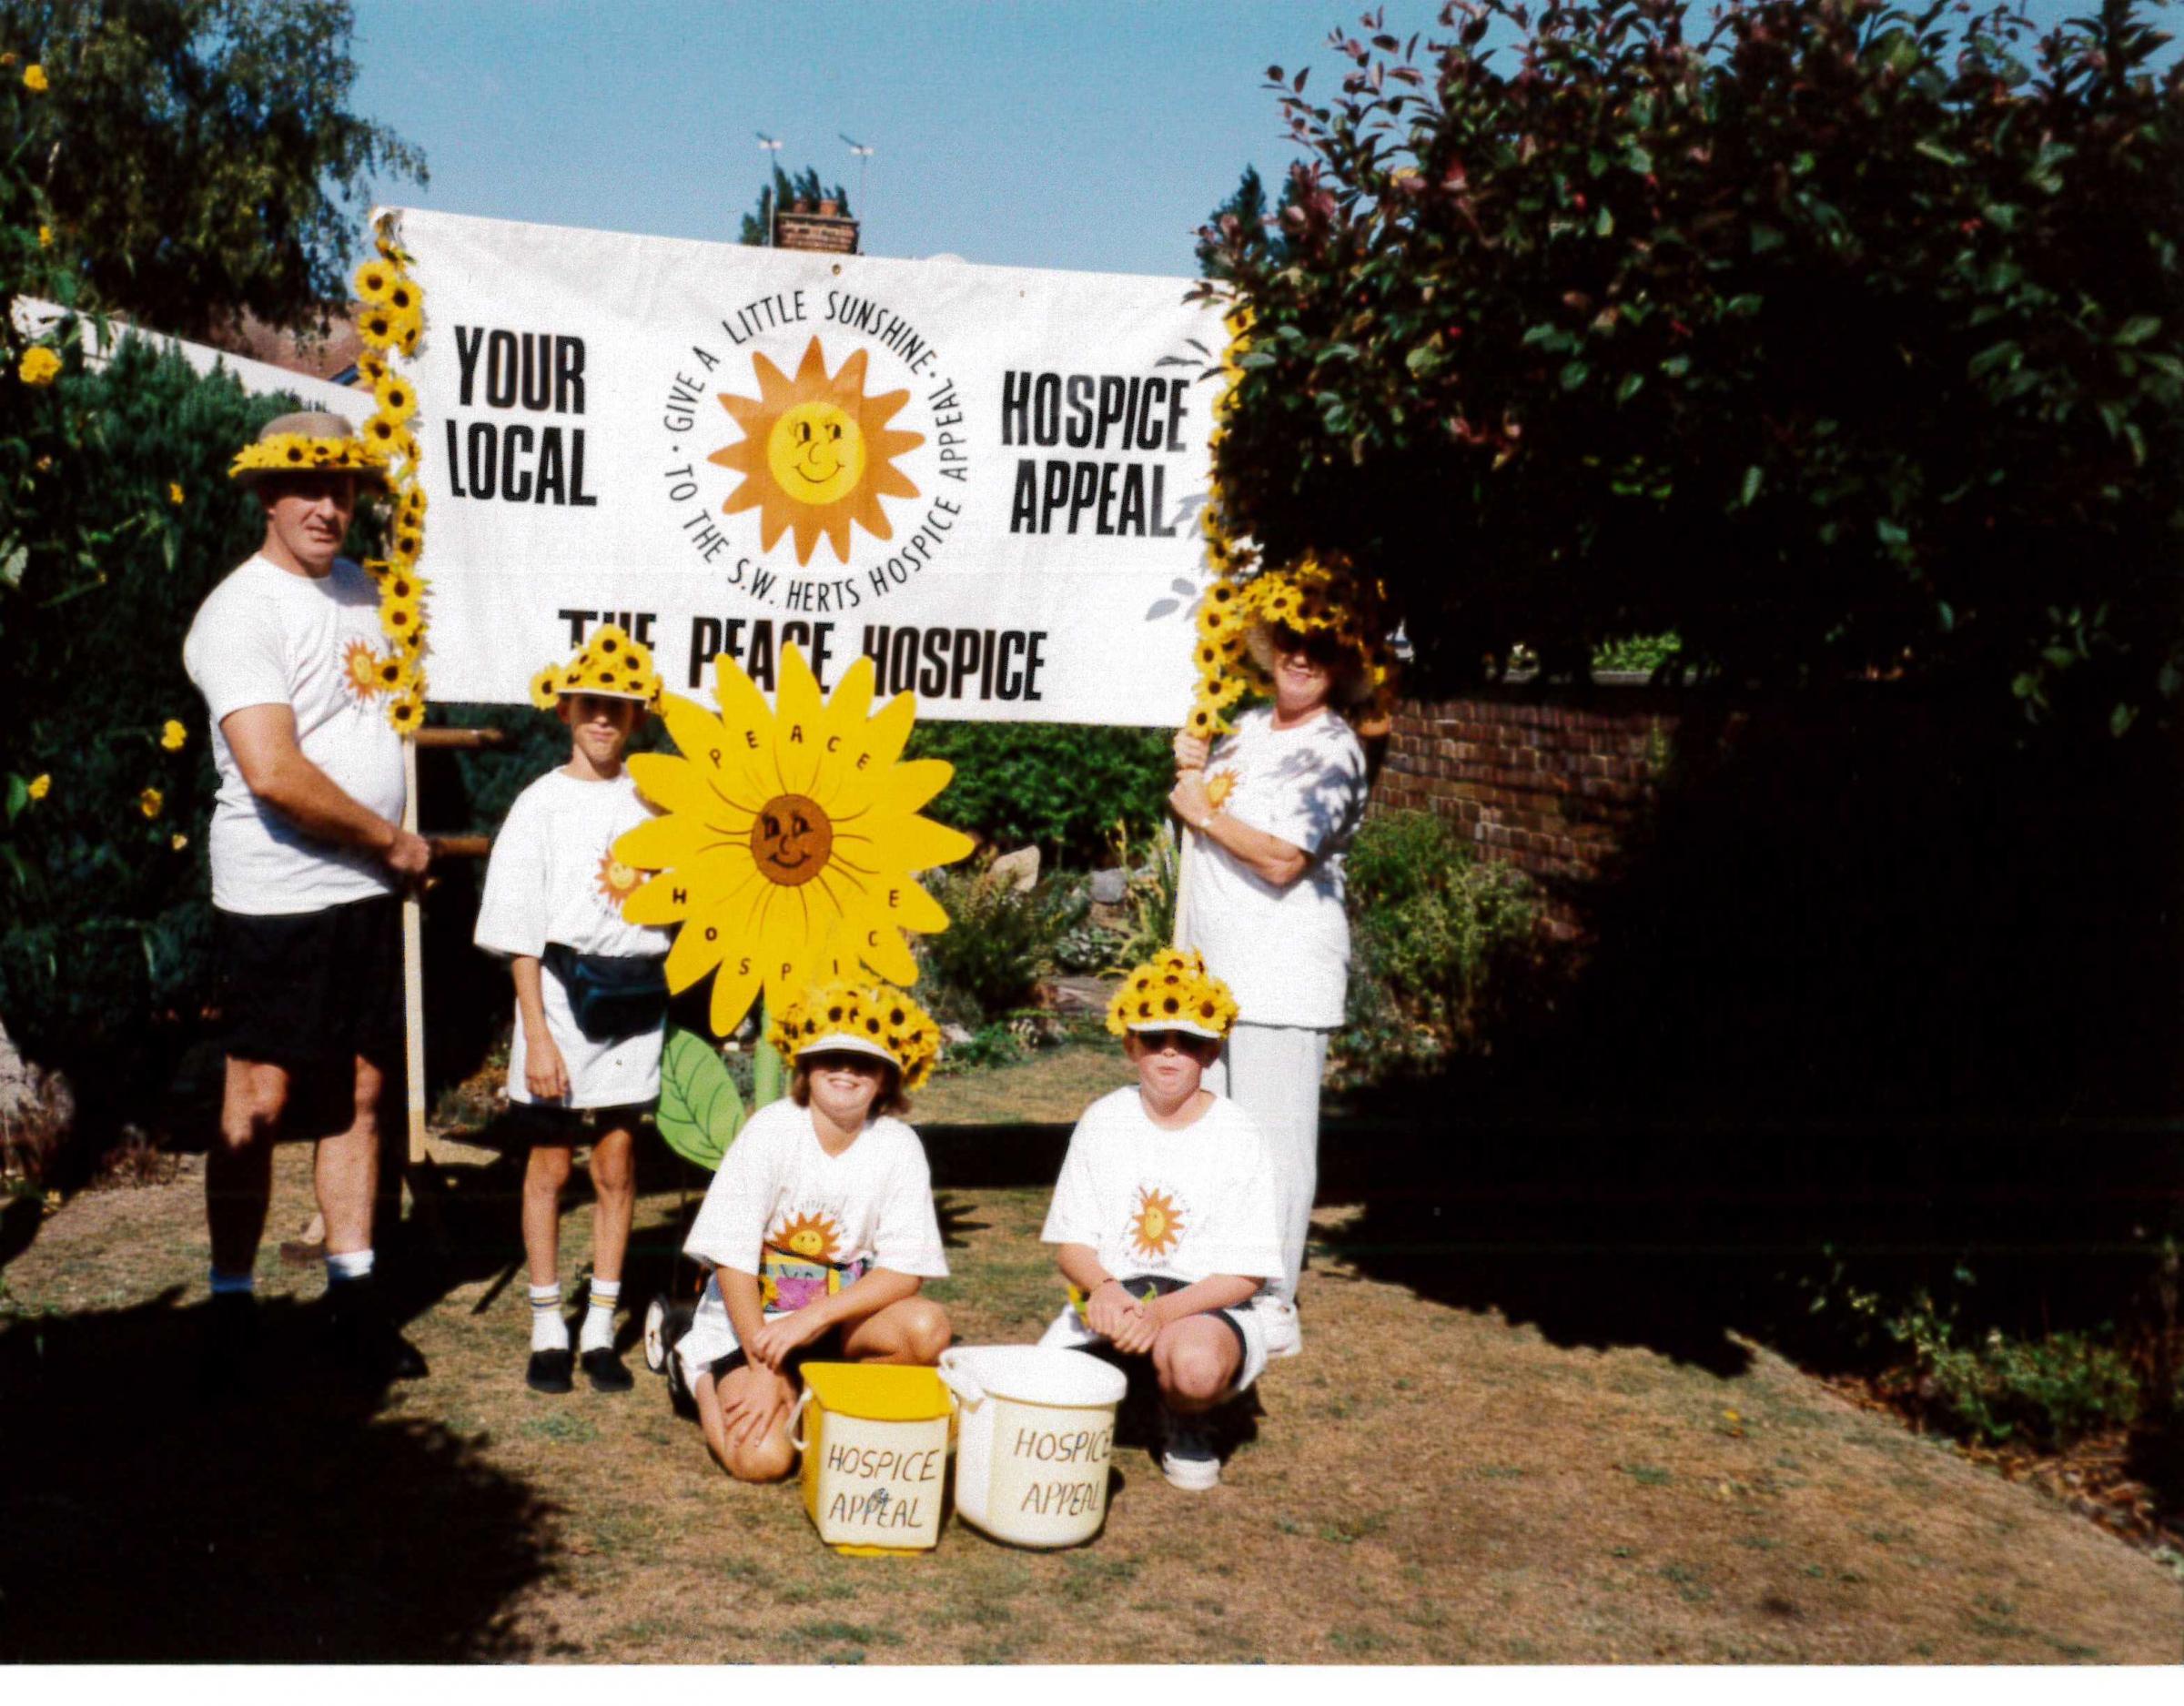 More fundraising for the Hopsice Appeal